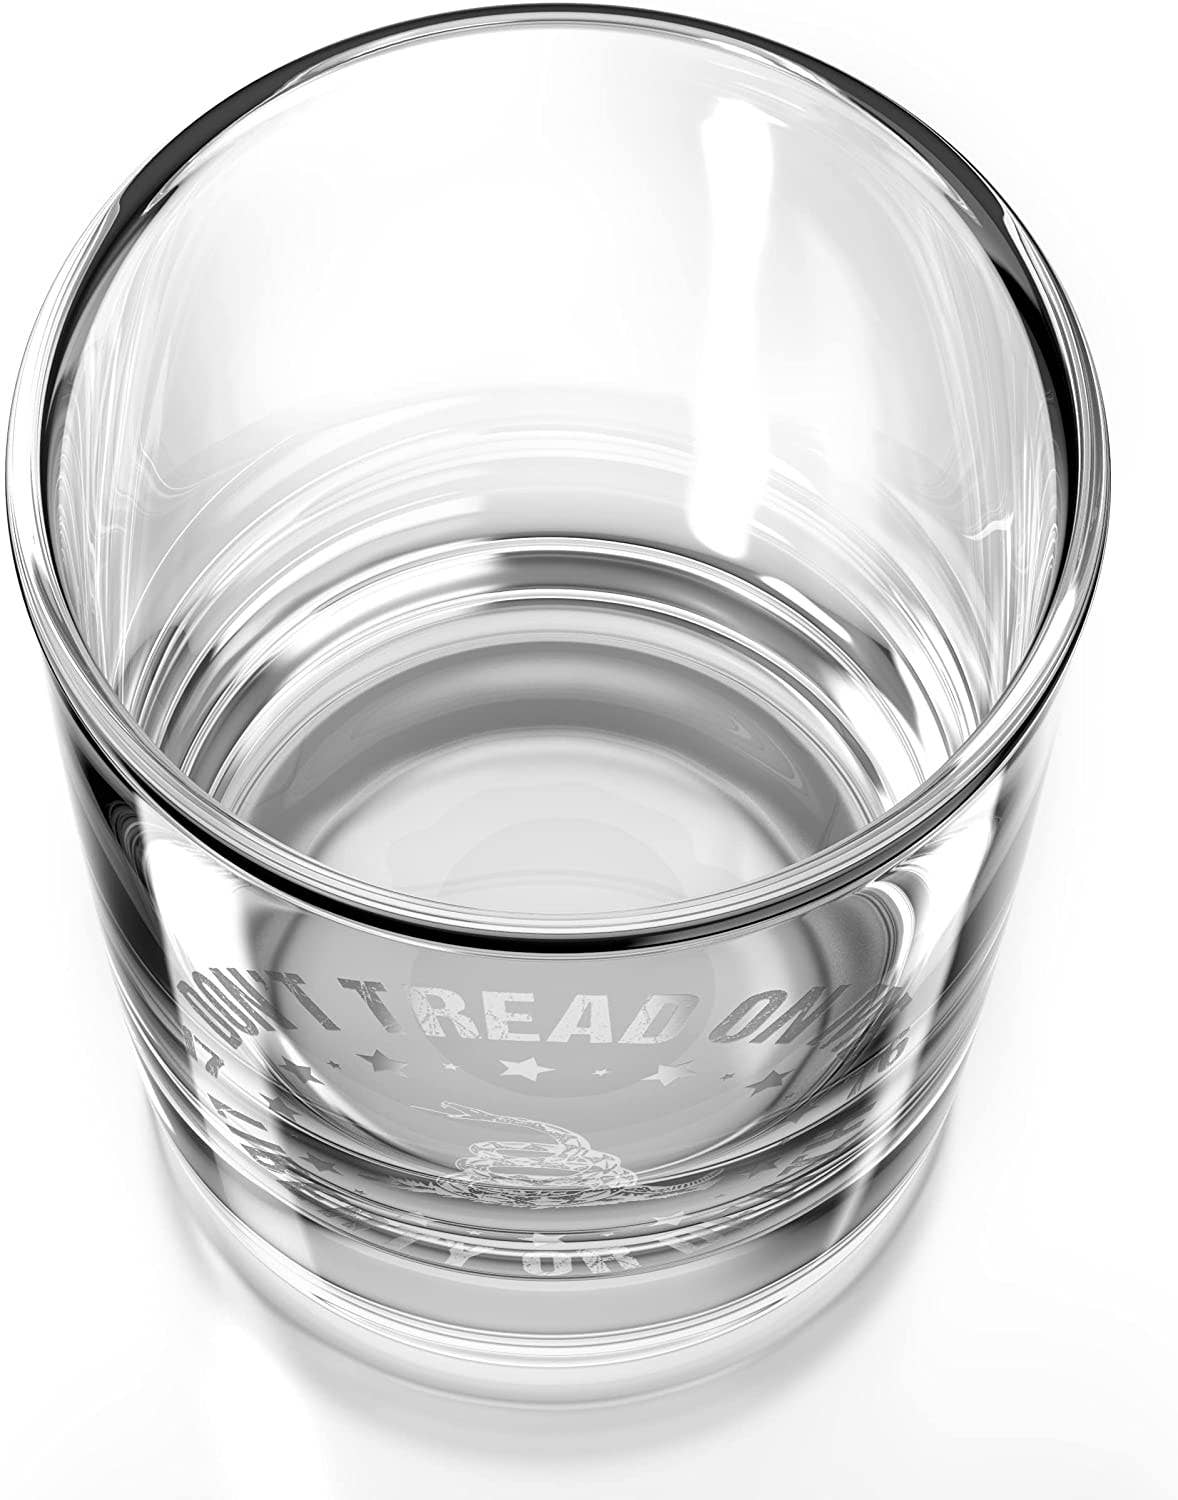 Don't Tread On Me Whiskey Glass